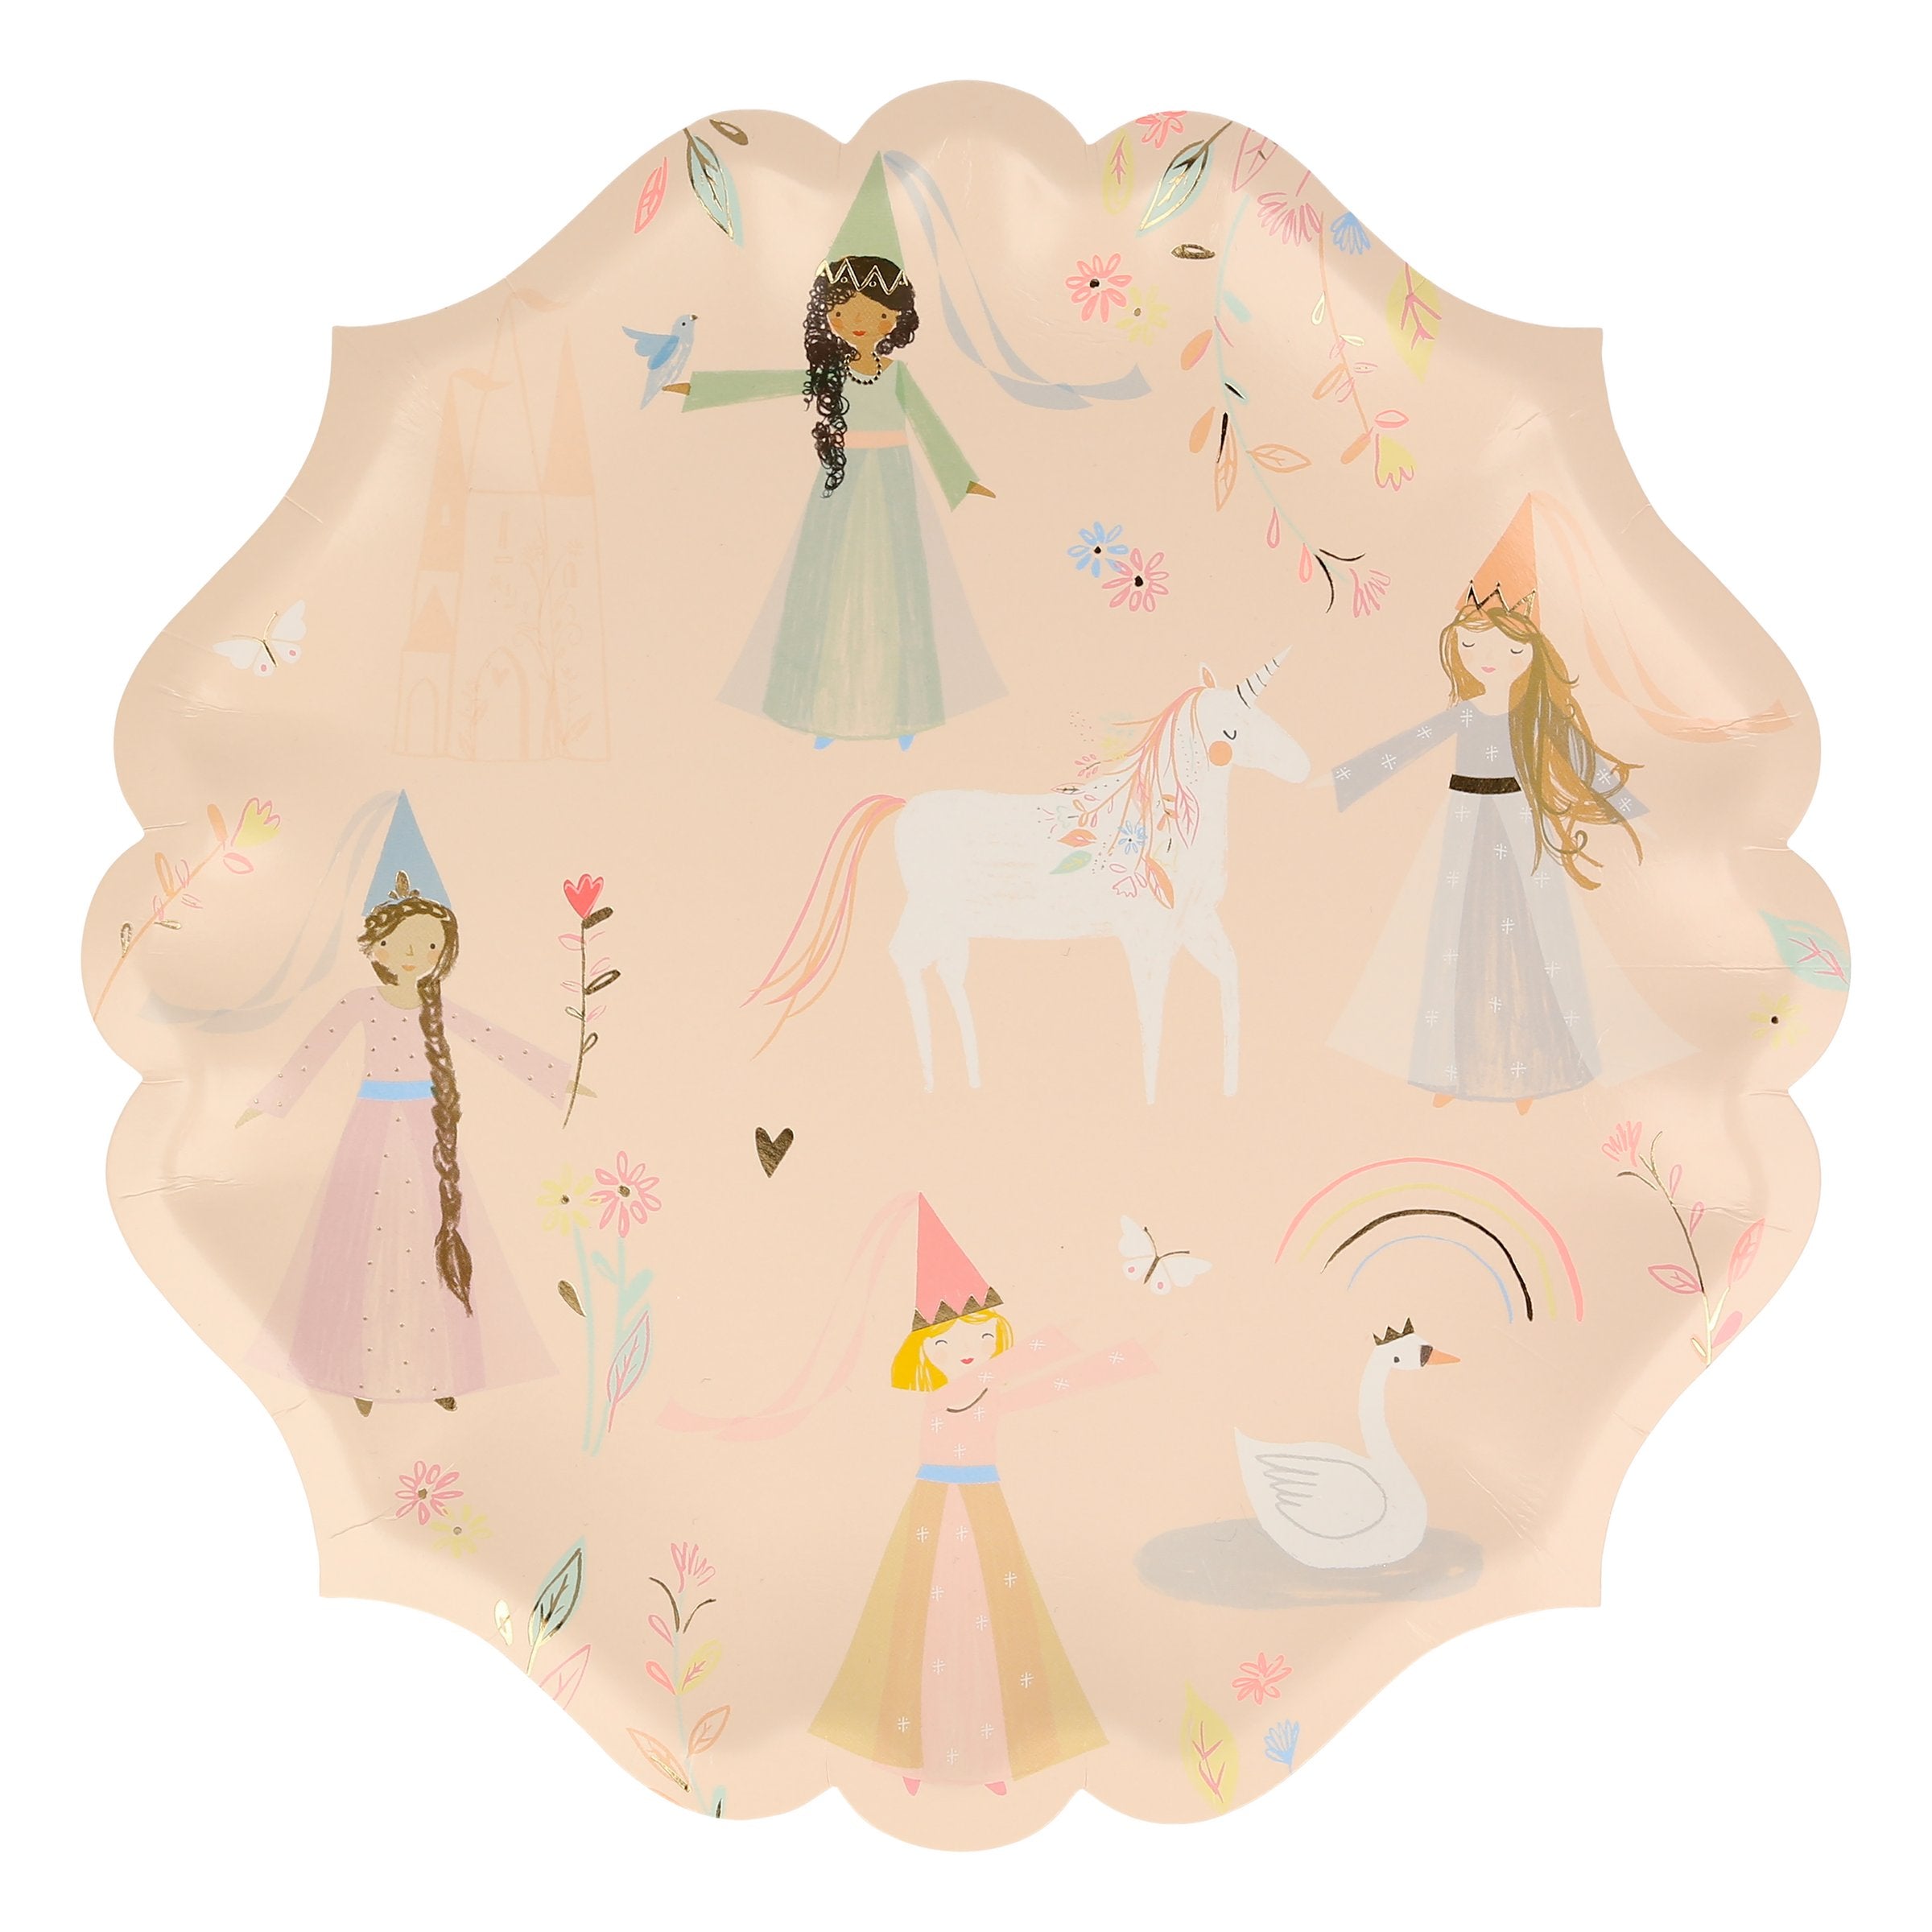 These princess birthday party plates feature beautiful designs of princesses and unicorns with gold foil detail.